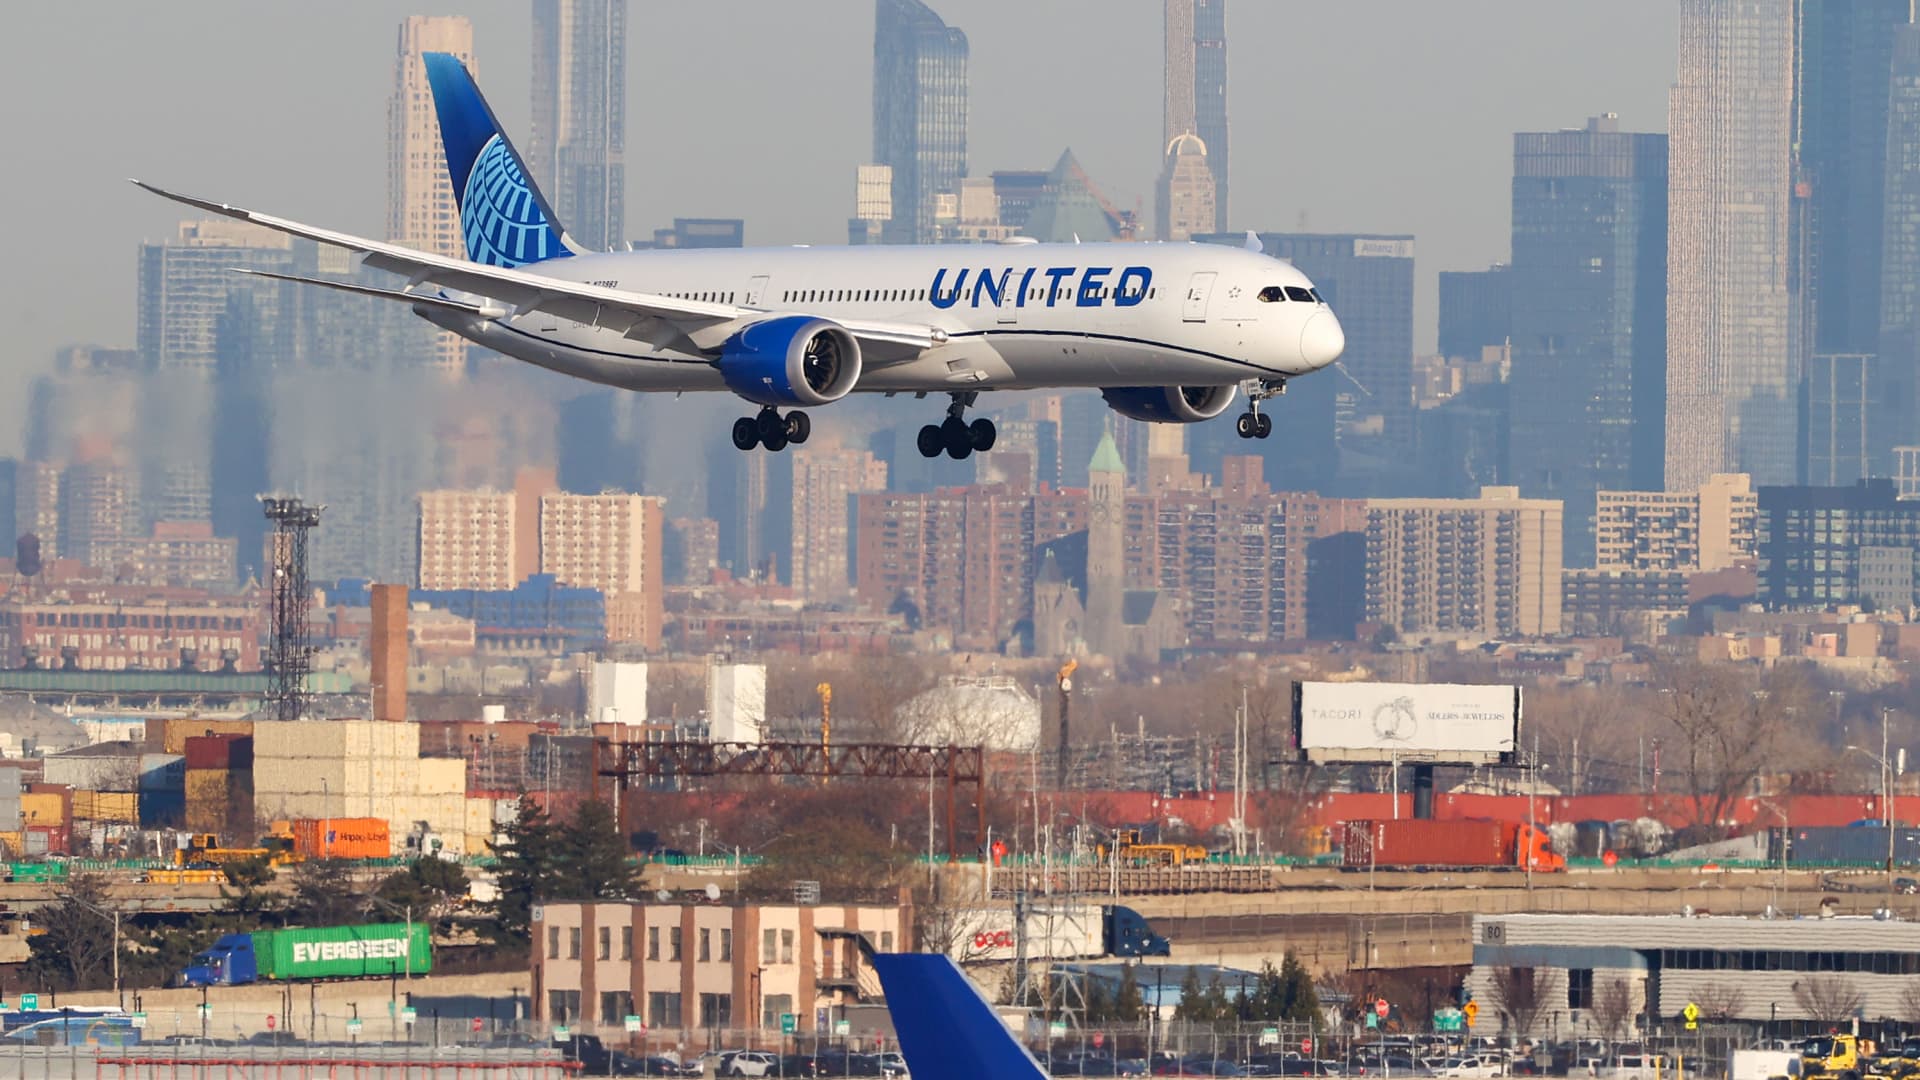 United Airlines will cut 12% of domestic Newark flights to help tame delays